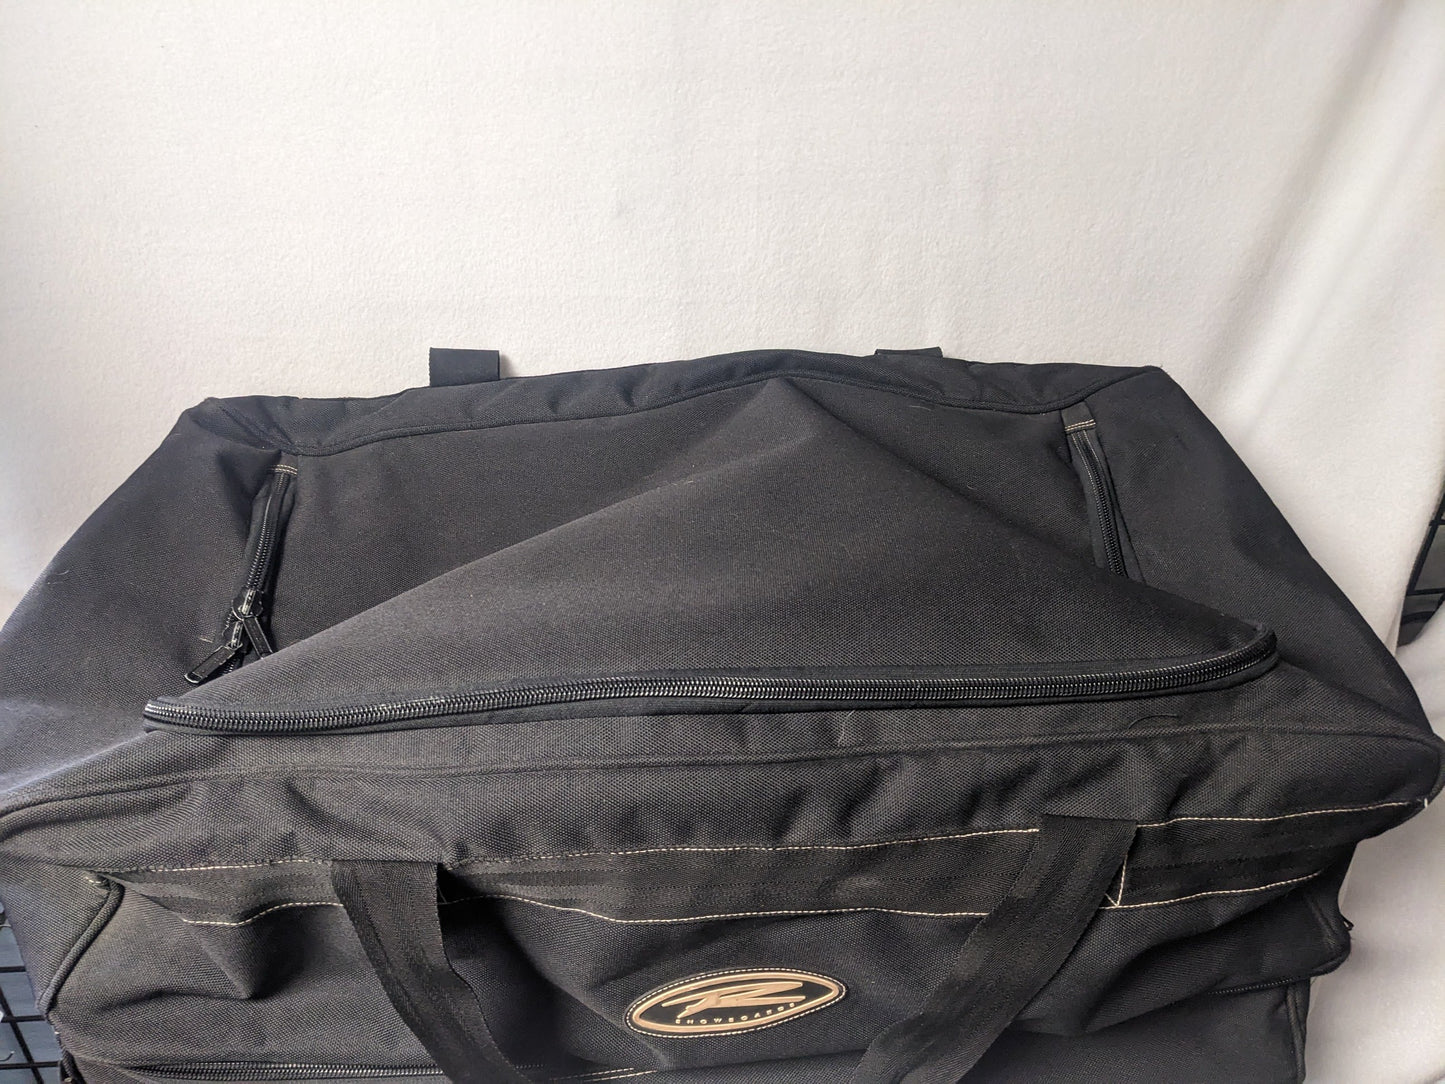 Rossignol Snowboard Roller Gear Bag Size 30 In x15 In x15 In Color Black Condition Used